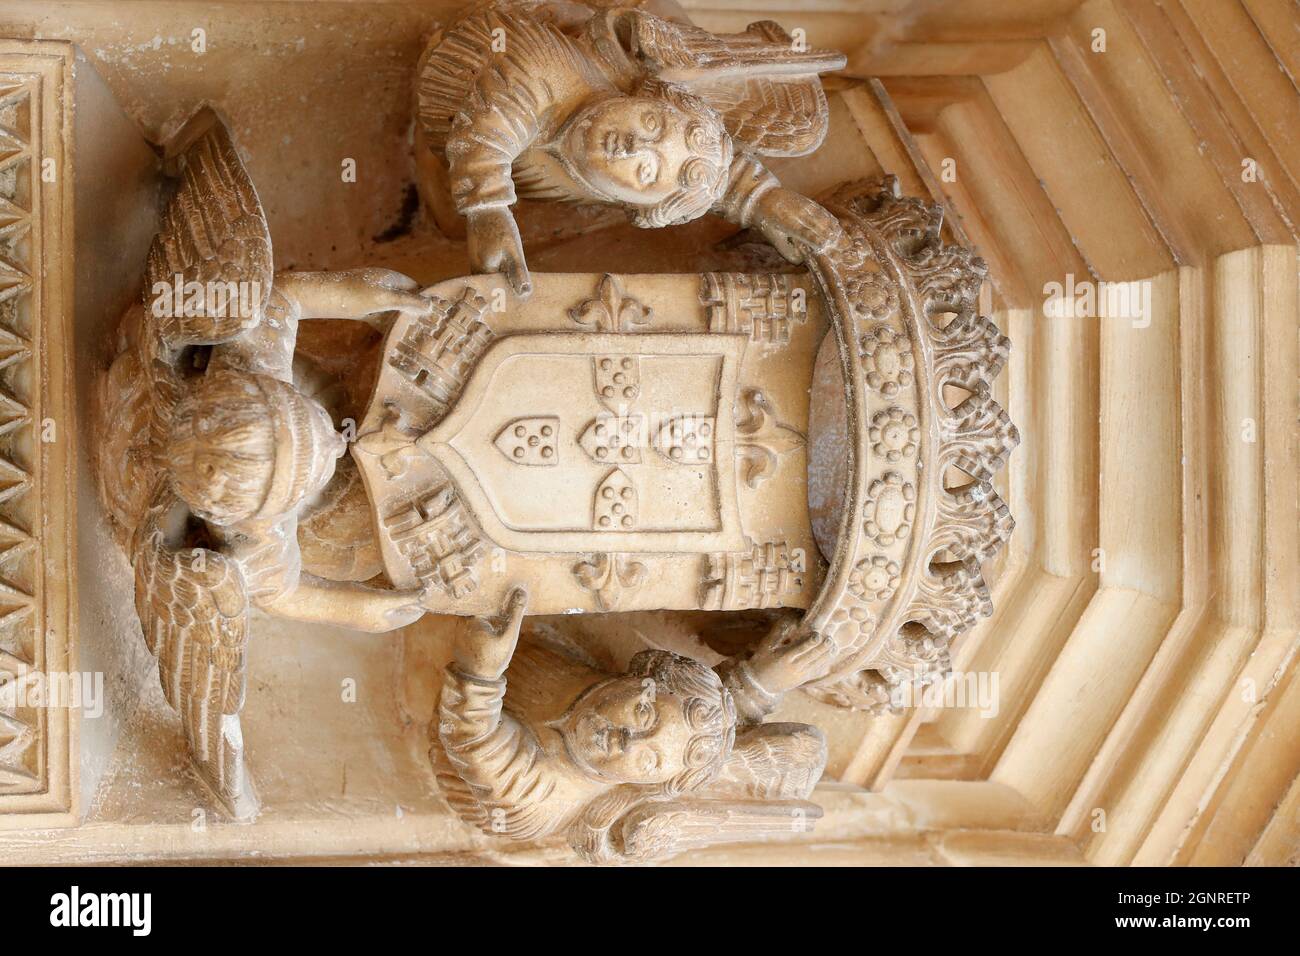 Batalha Monastery. Late Gothic architecture, intermingled with the Manueline style. Western portal. Sculpture.  Portugal. Stock Photo